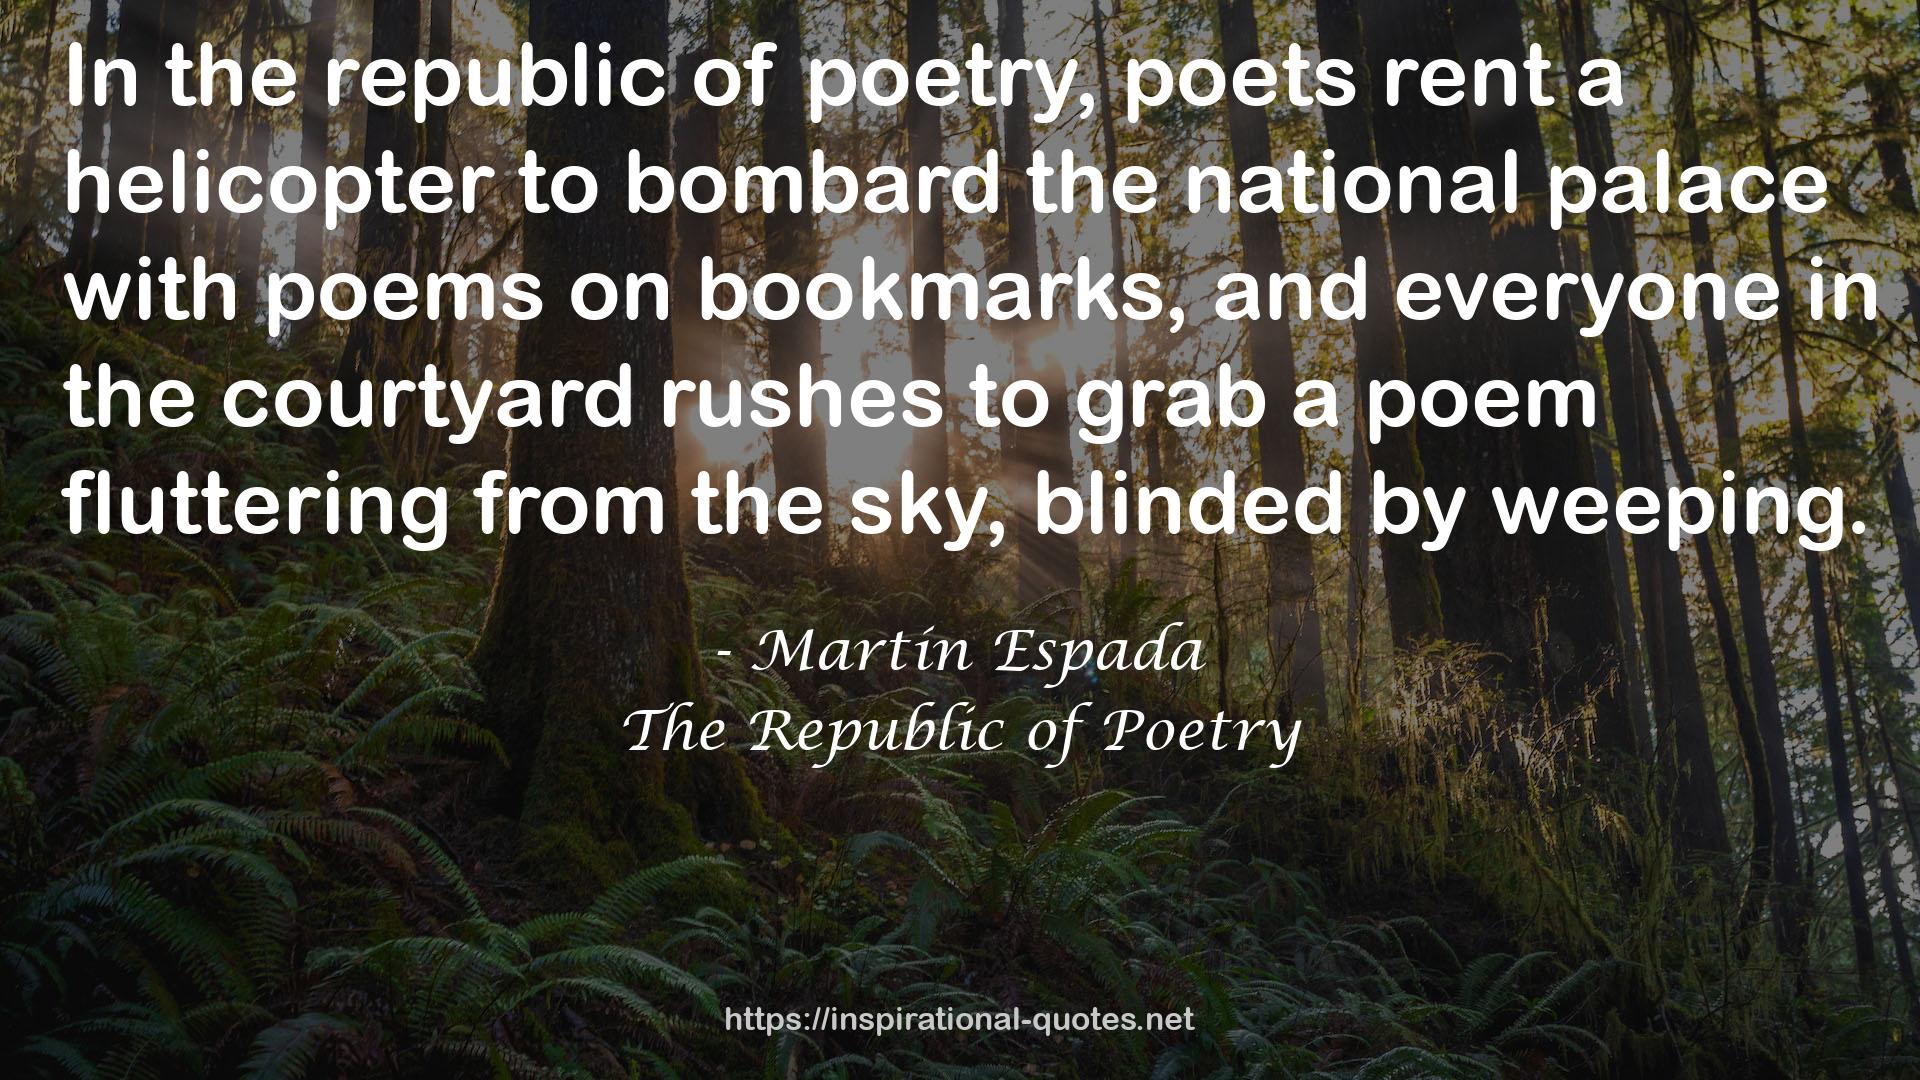 The Republic of Poetry QUOTES